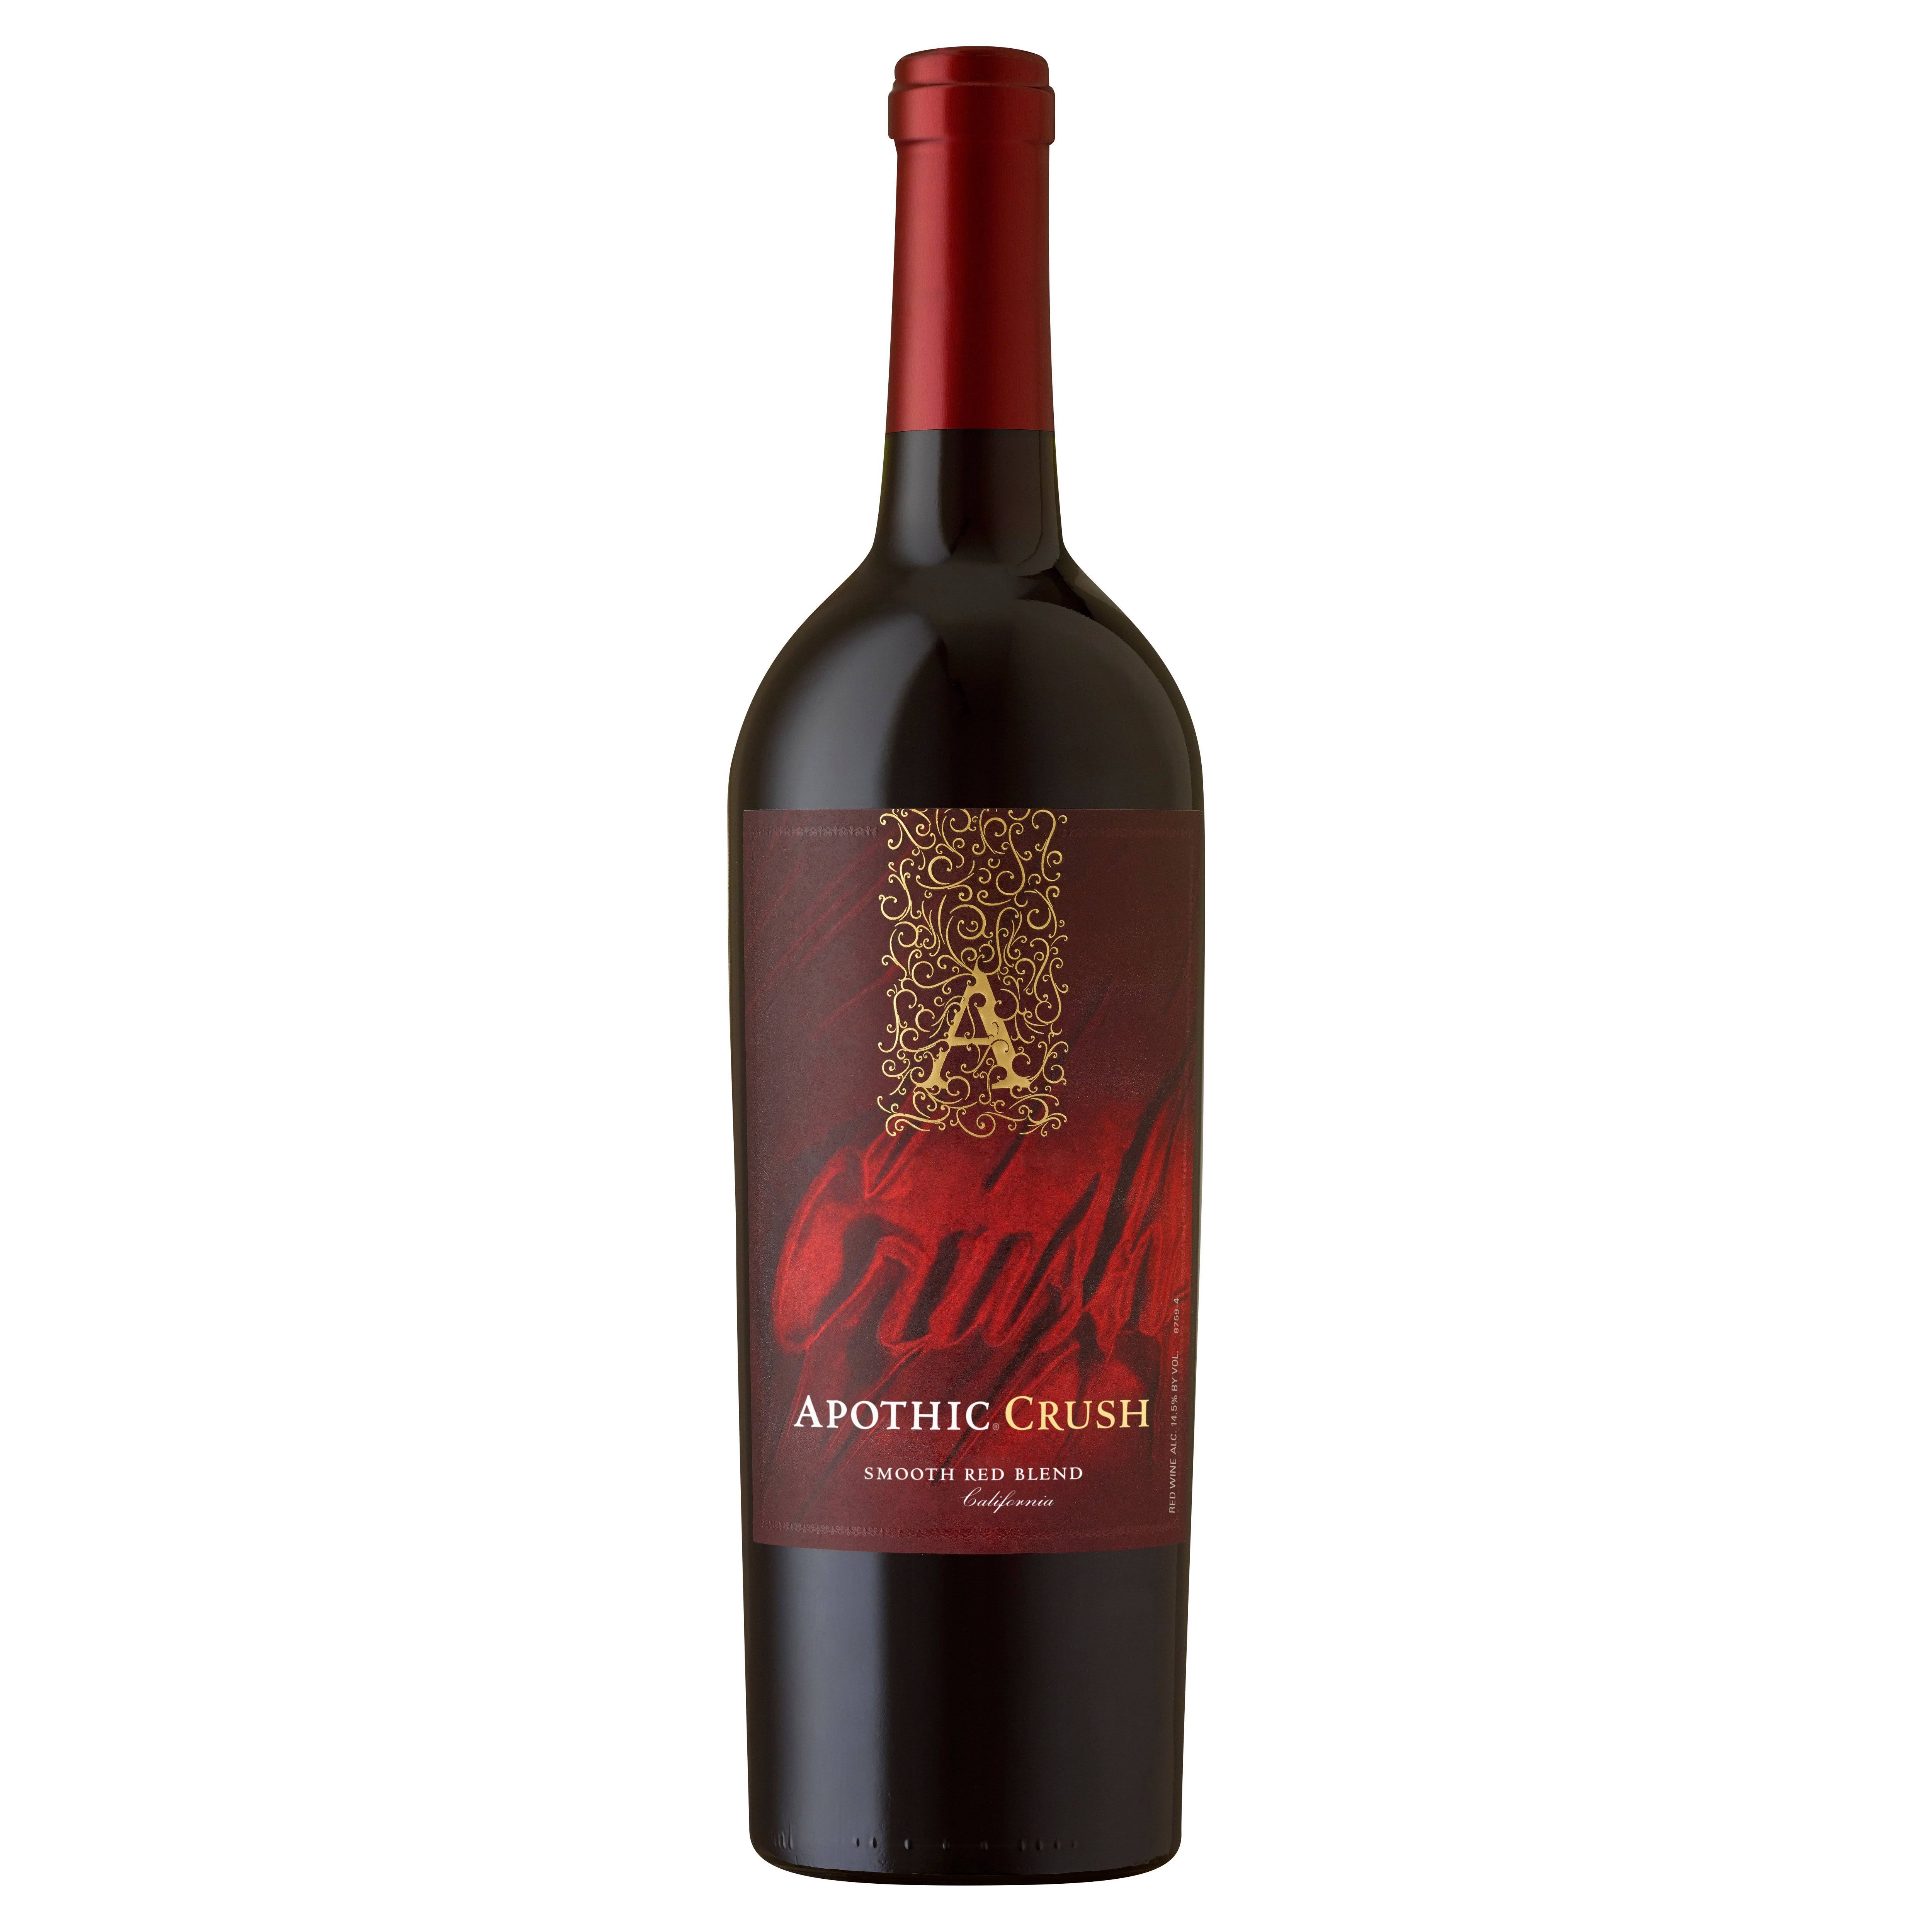 APOTHIC CRUSH RED BLEND